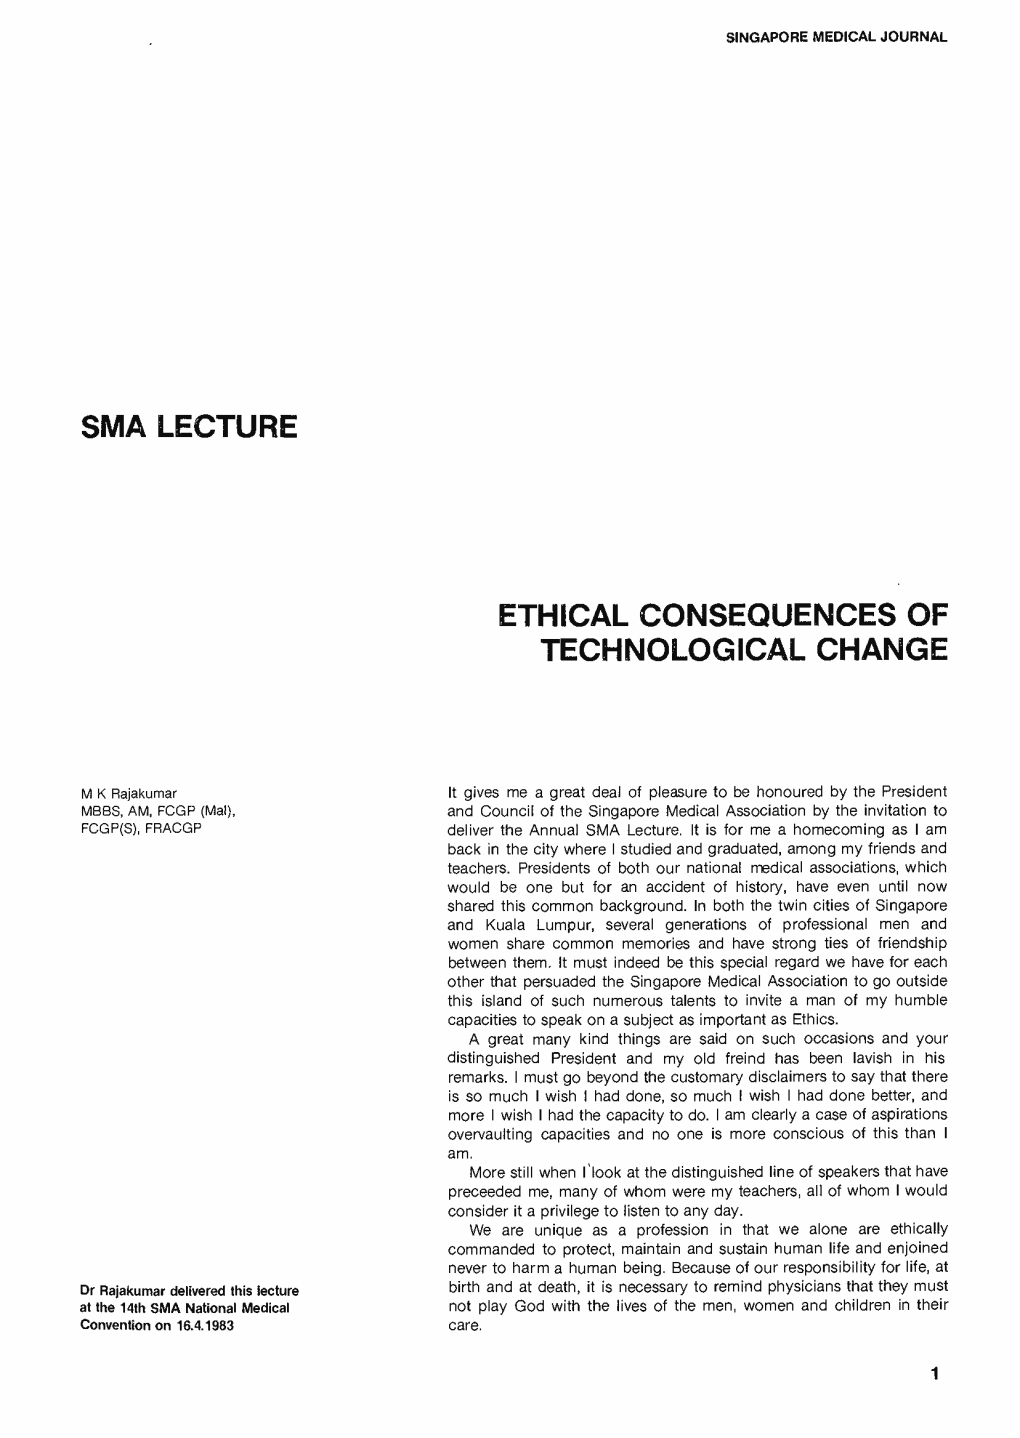 Ethical Consequences of Technological Change